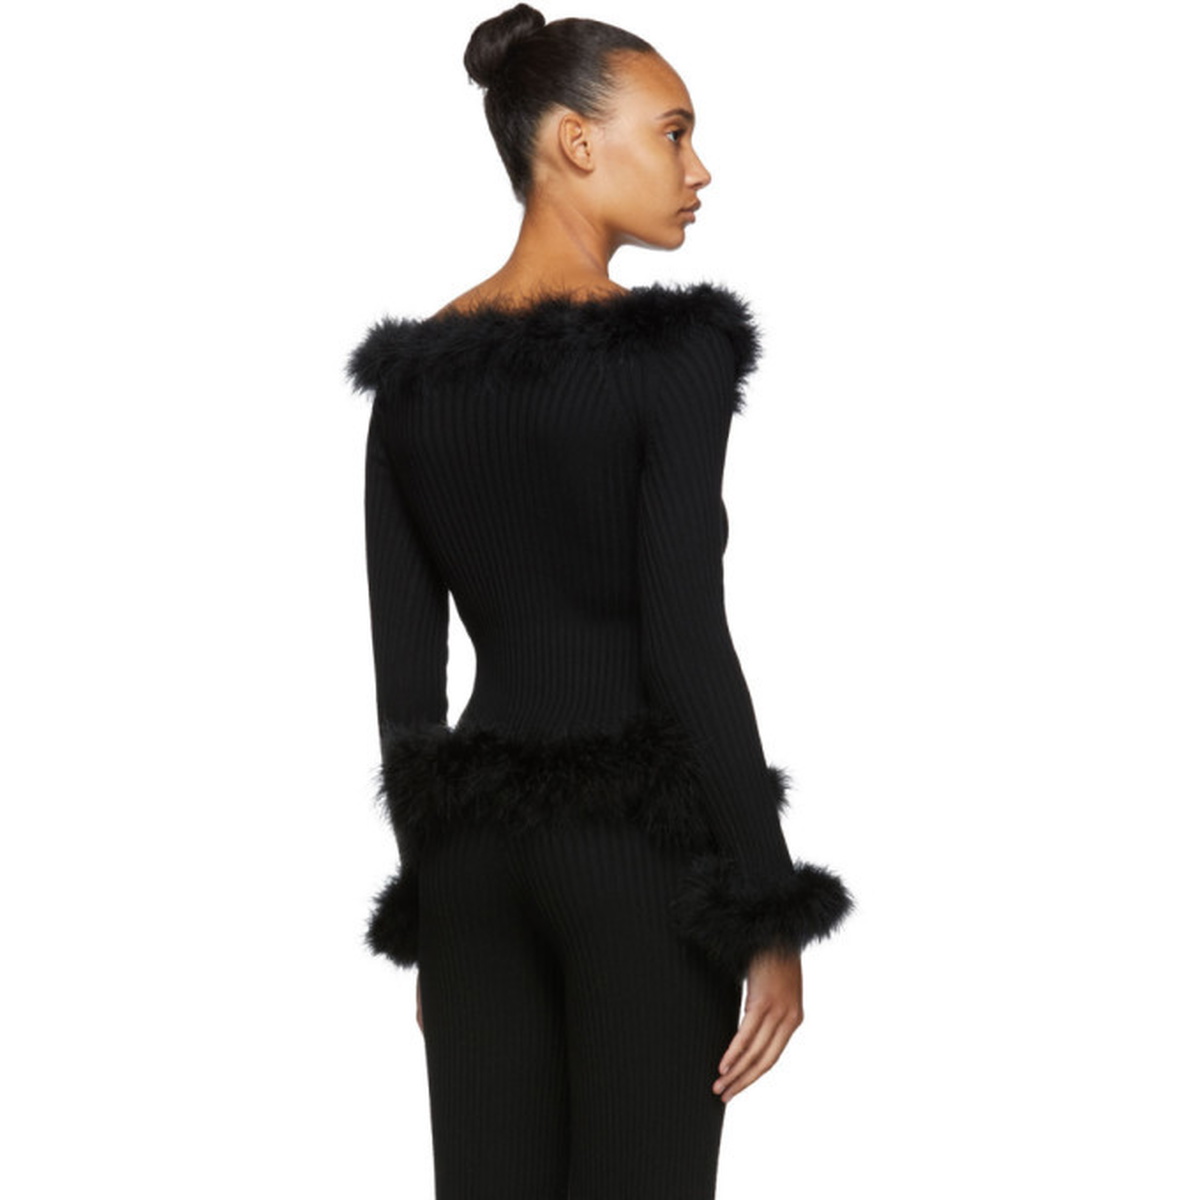 Opening Ceremony Black Feather Trim Sweater